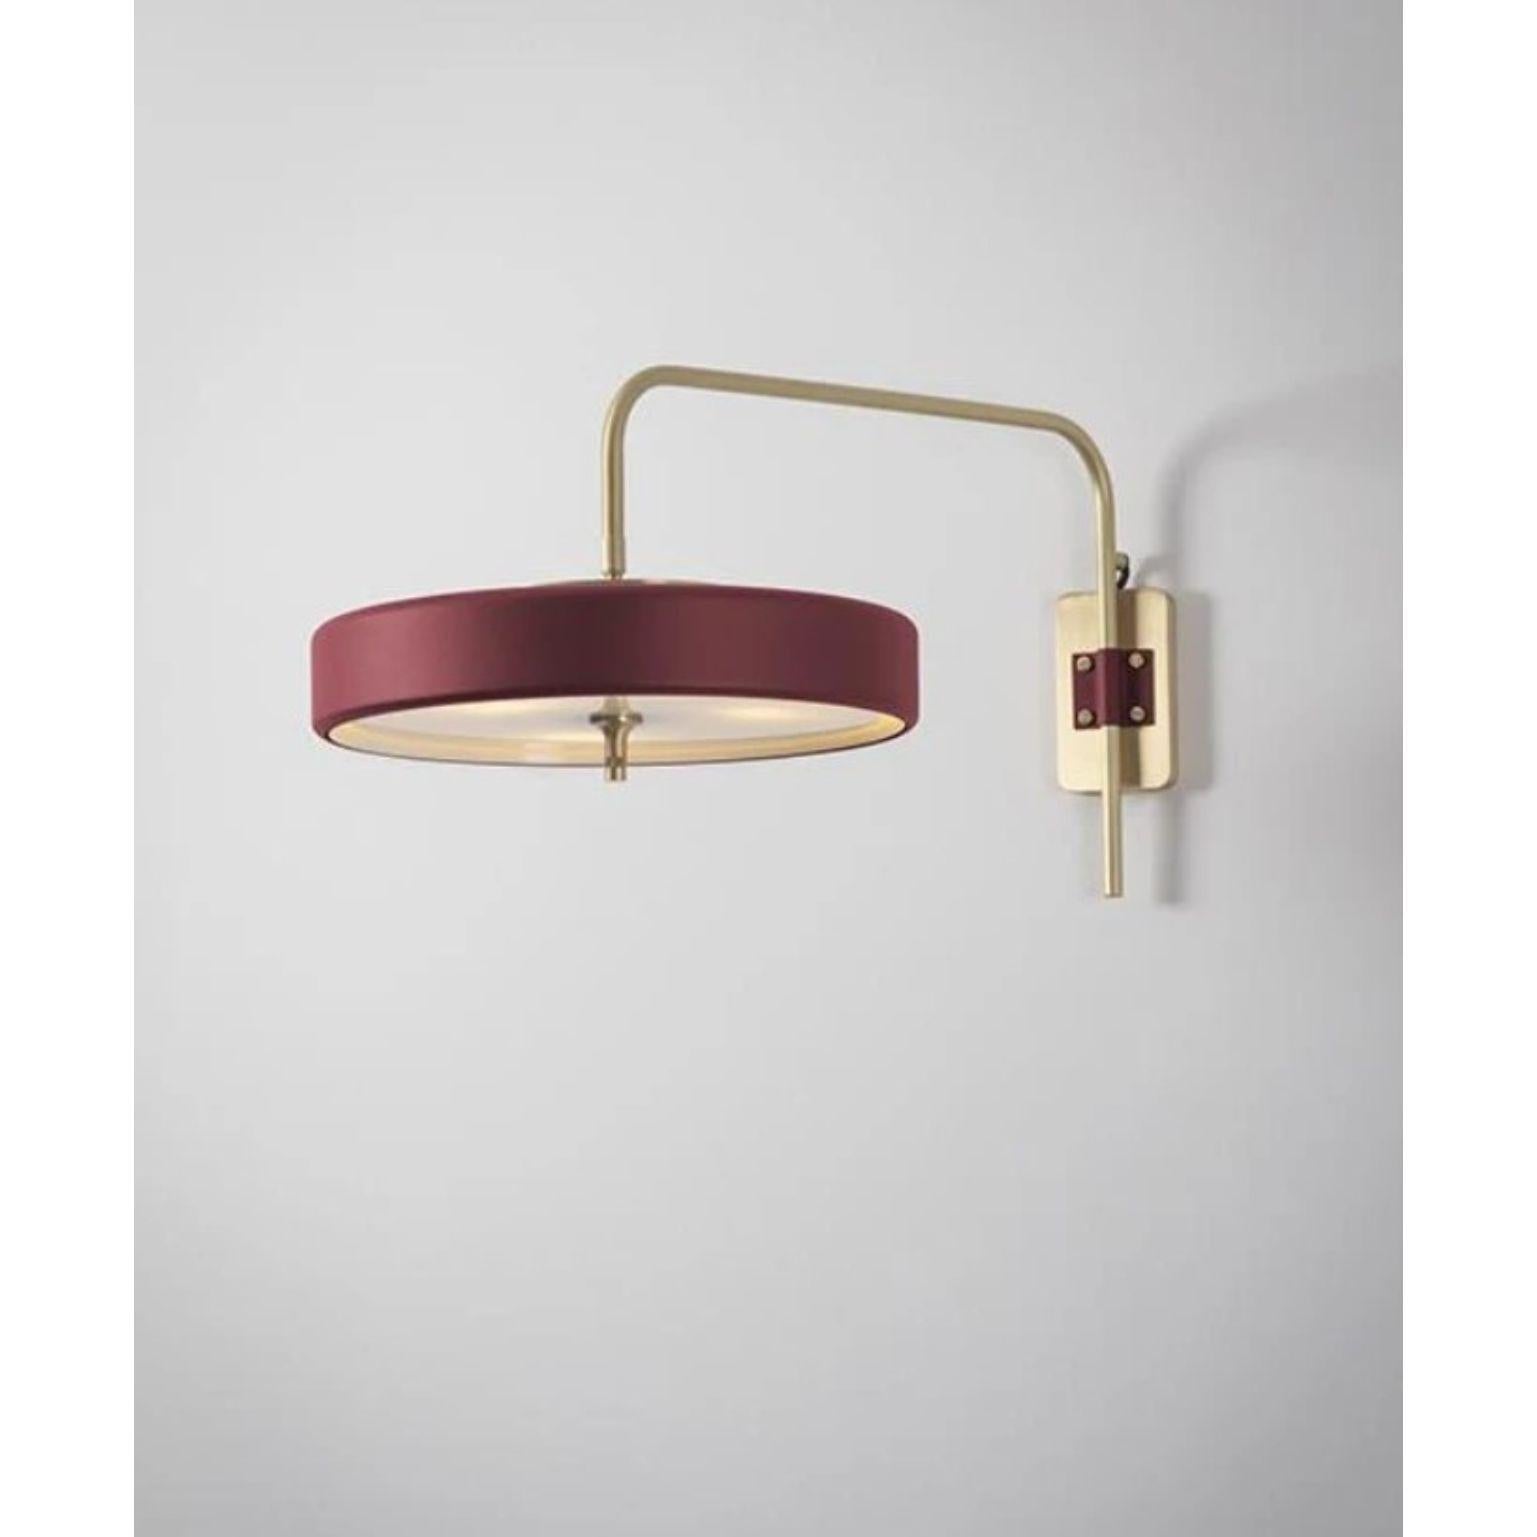 Revolve wall light - Brushed brass - Oxblood by Bert Frank
Dimensions: 31 x 63 x 35 cm
Materials: Brass, steel

Available in polished brass

Flush-fitting opal glass shade with central dome of polished marble – white Carrara or green Guatemala